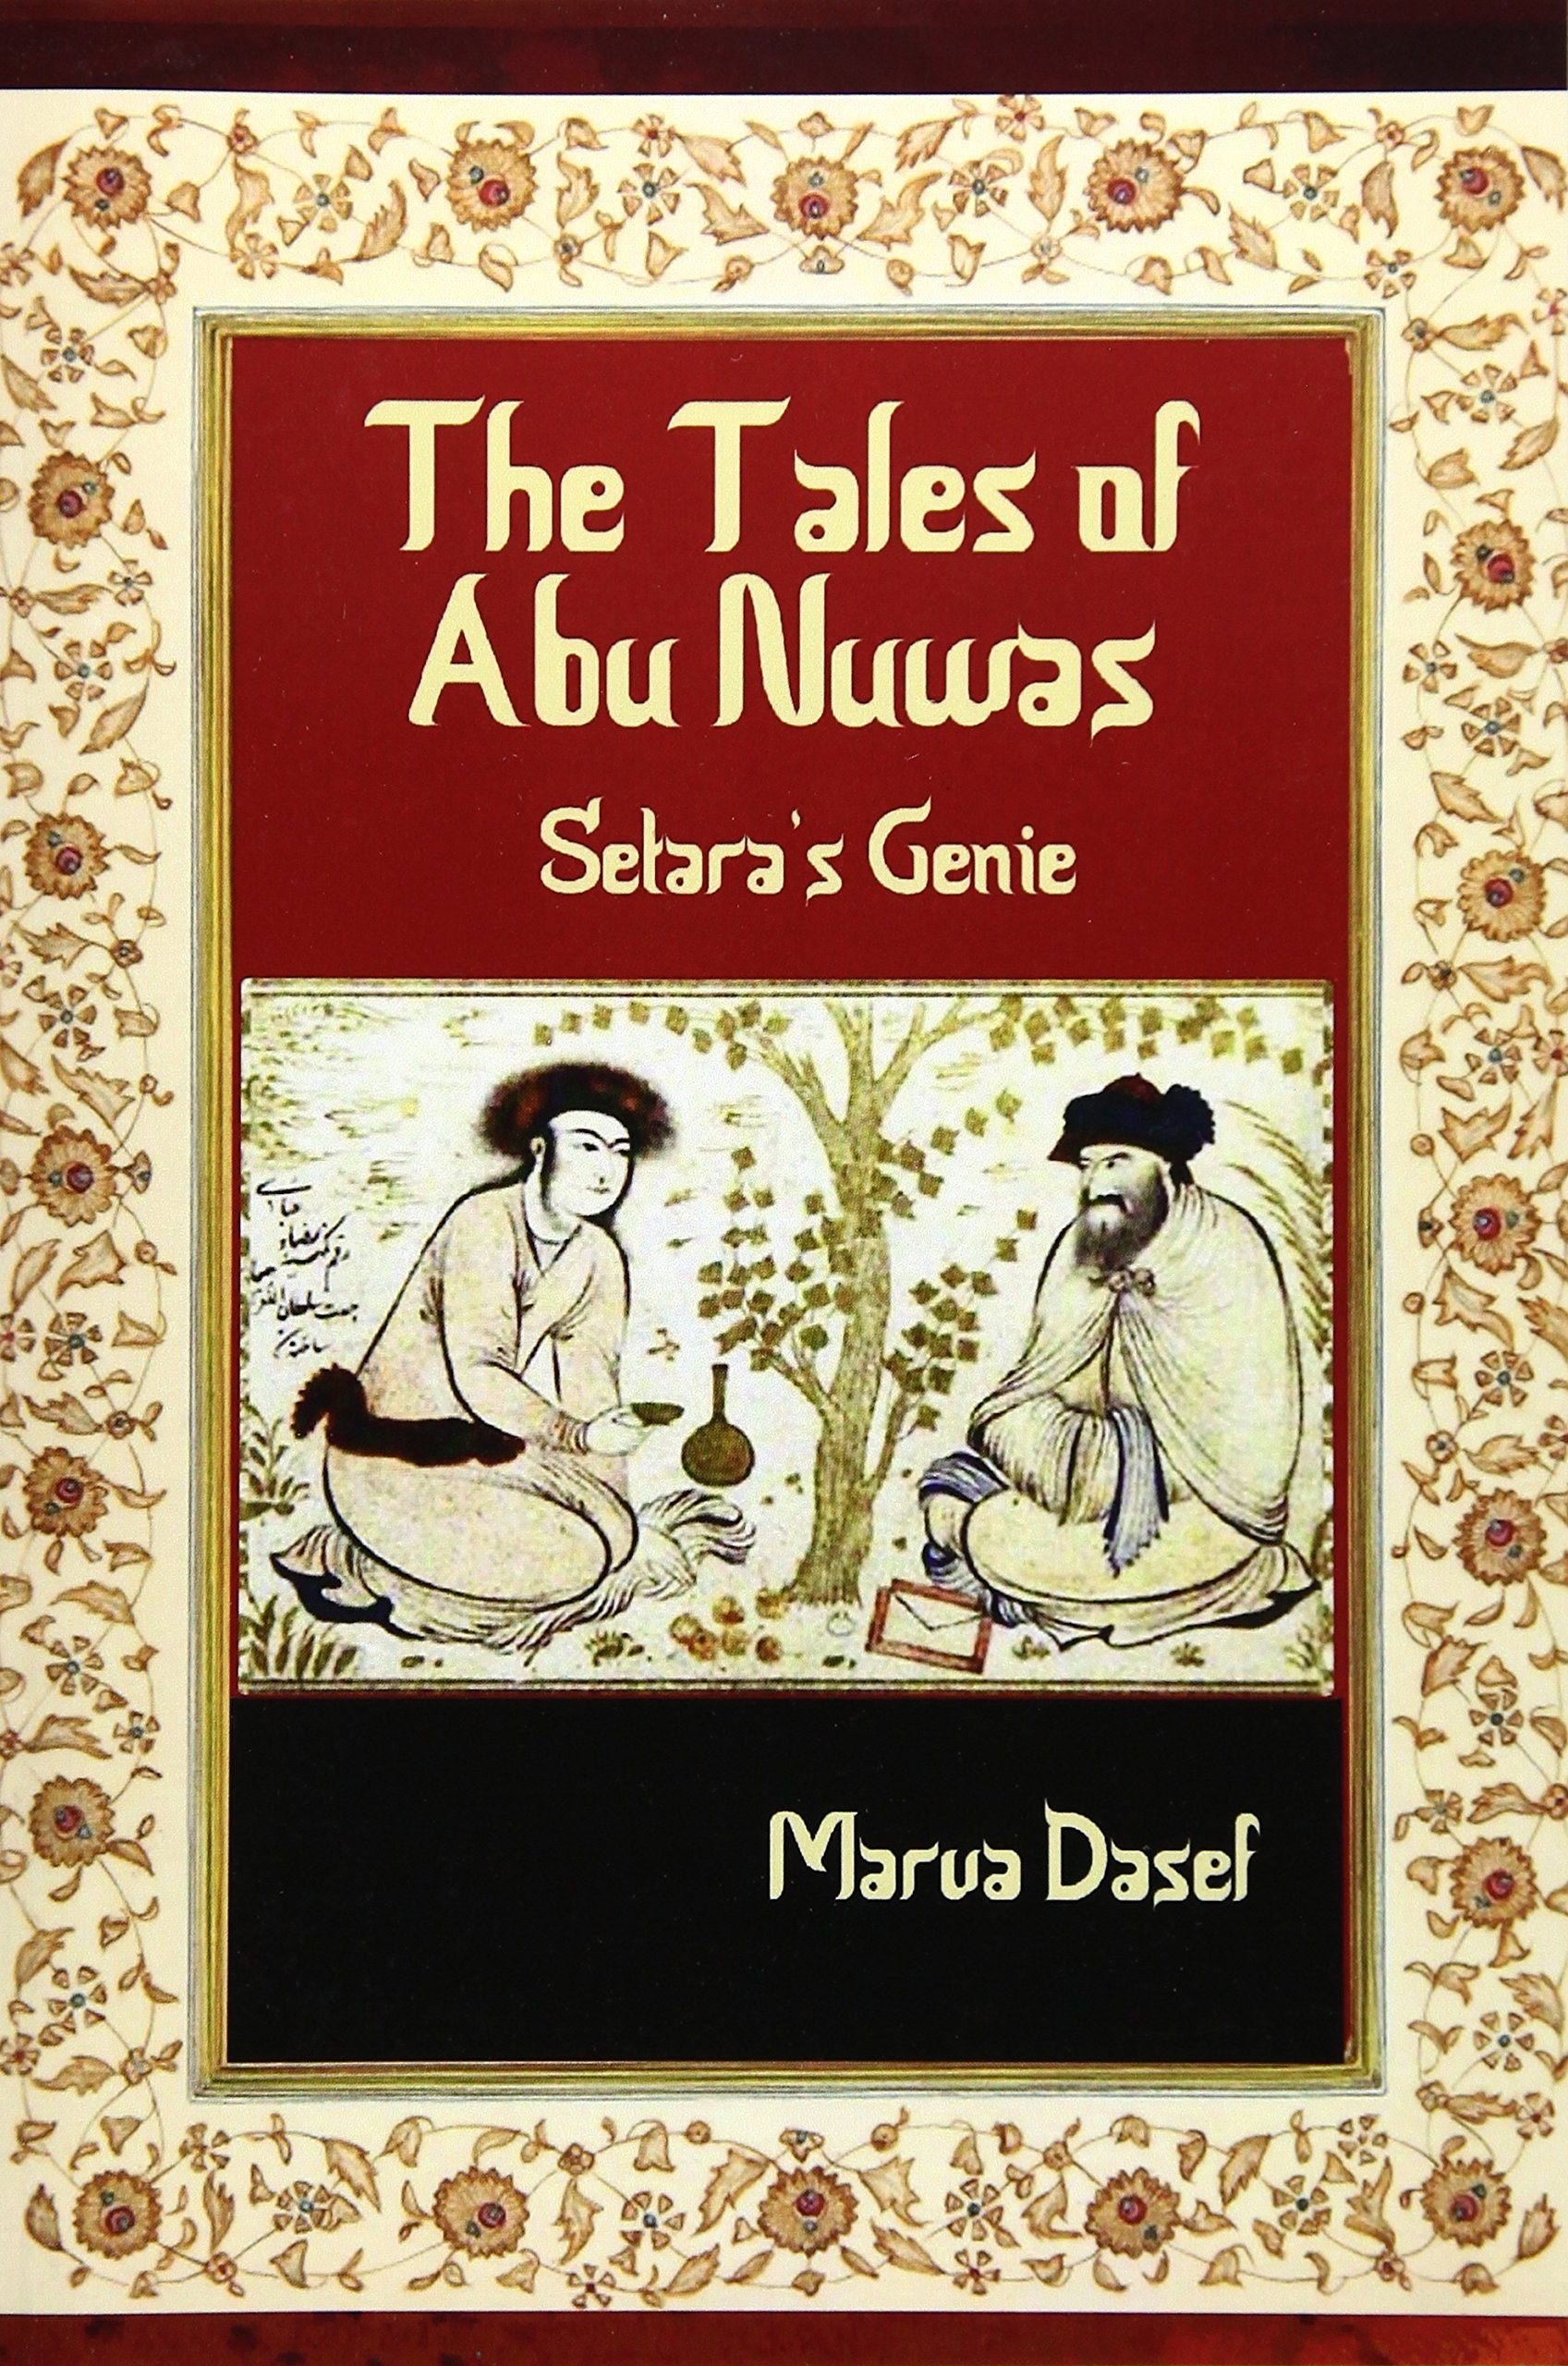 The Tales of Abu Nuwas